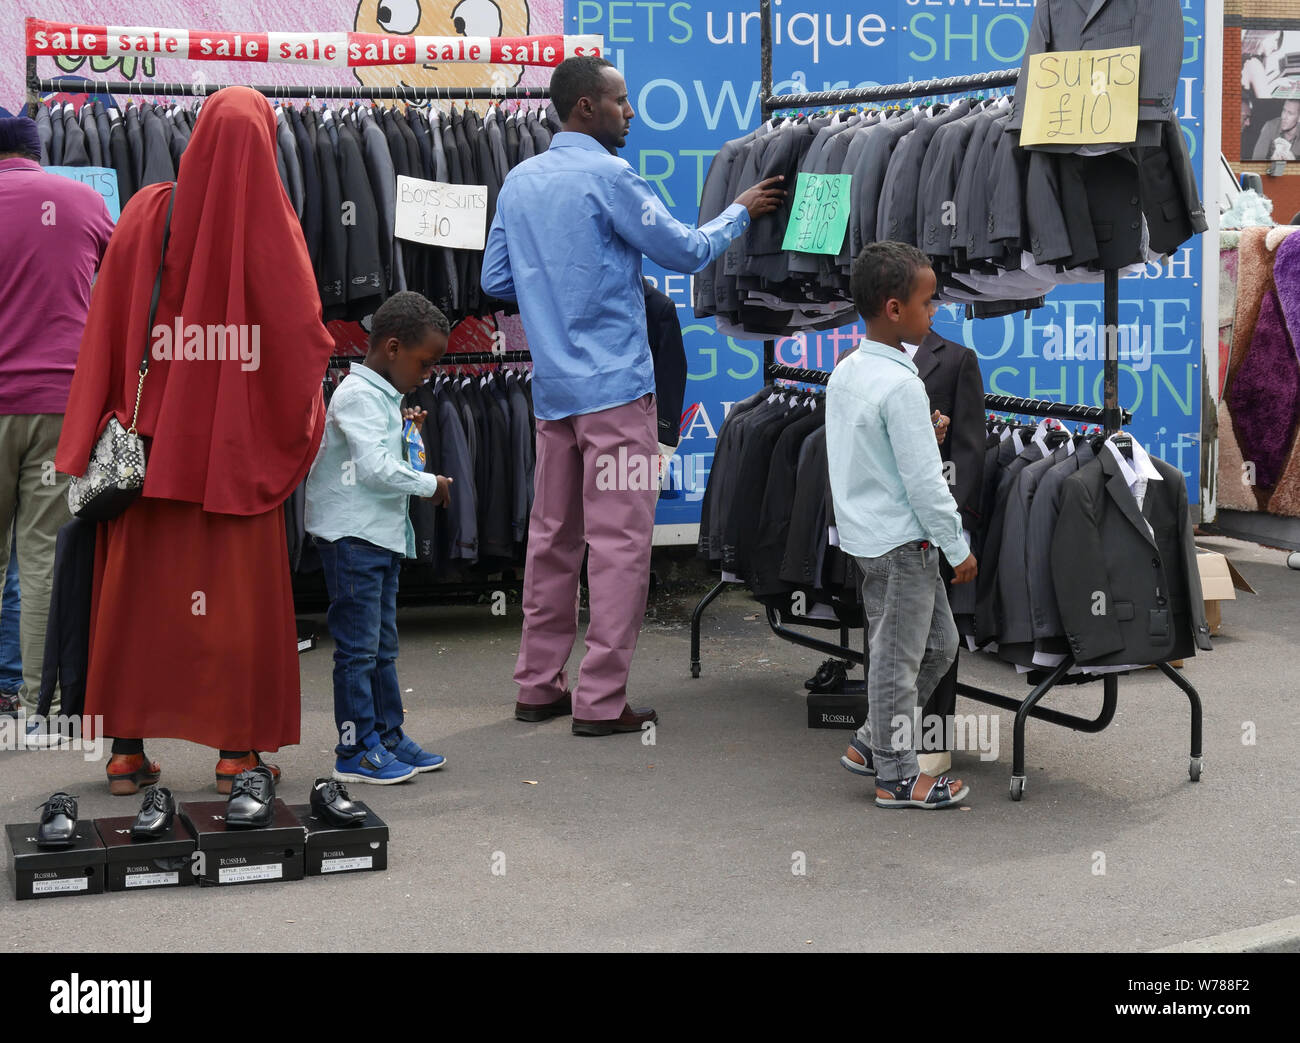 Family out shopping for boys suits on an outdoor market in England UK.  photo DON TONGE Stock Photo